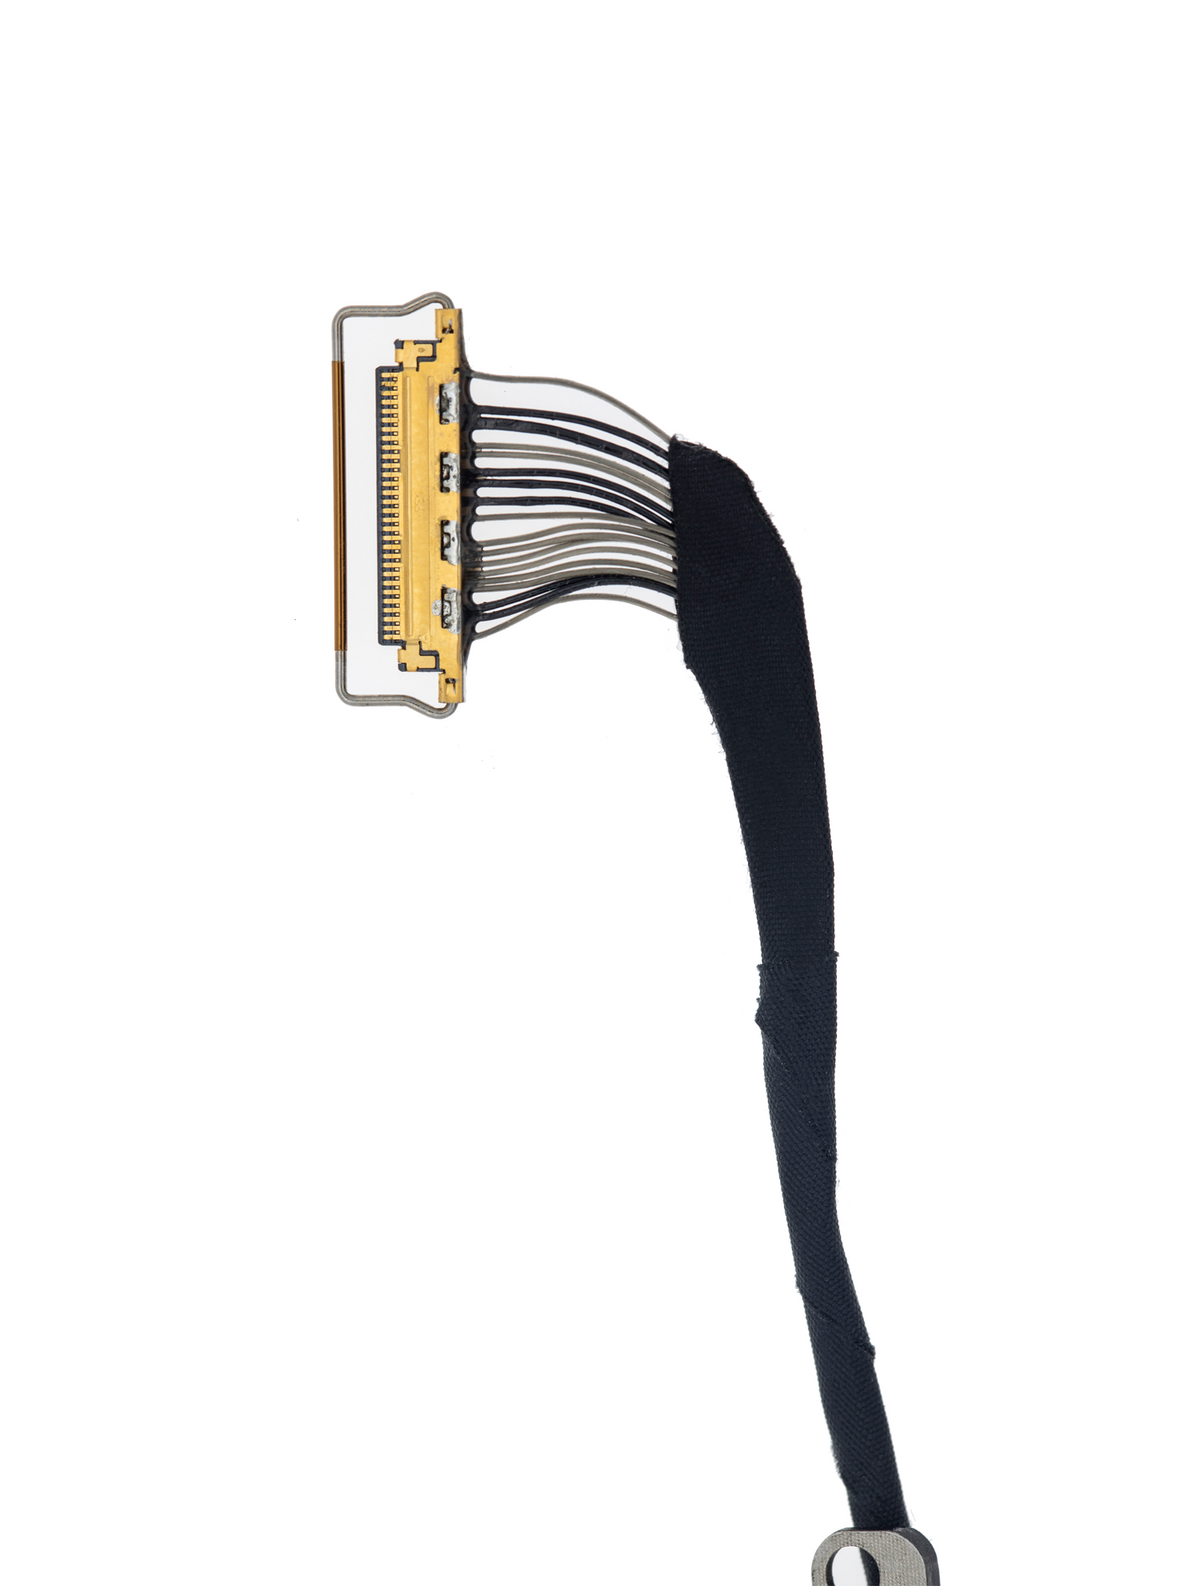 DISPLAY LVDS CABLE + LEFT HINGE FOR MACBOOK AIR 11" A1370 ( LATE 2010 / MID 2011)